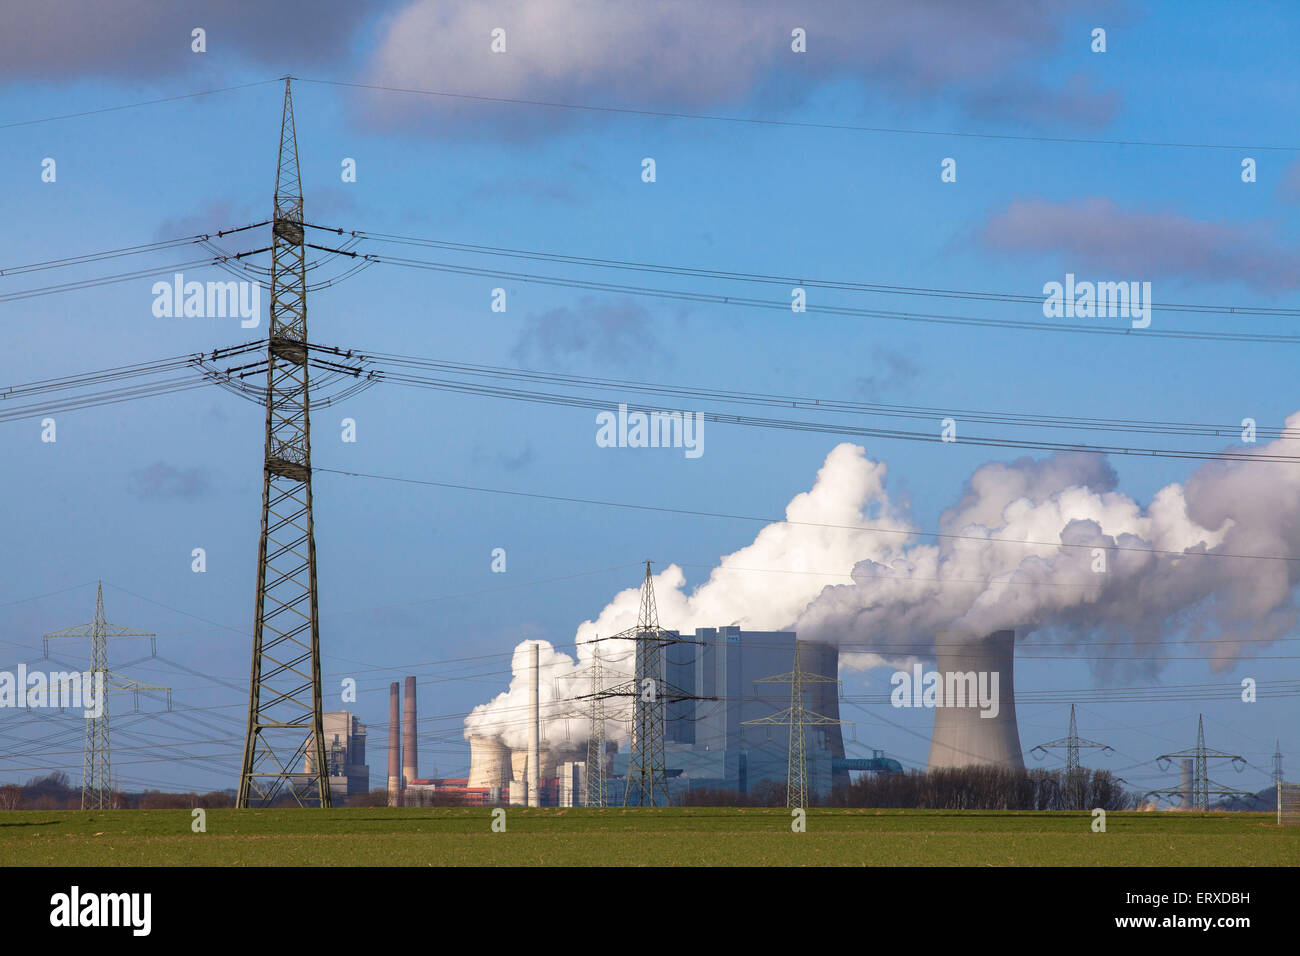 the lignite-fired power plant Neurath in Grevenbroich, Germany. Stock Photo